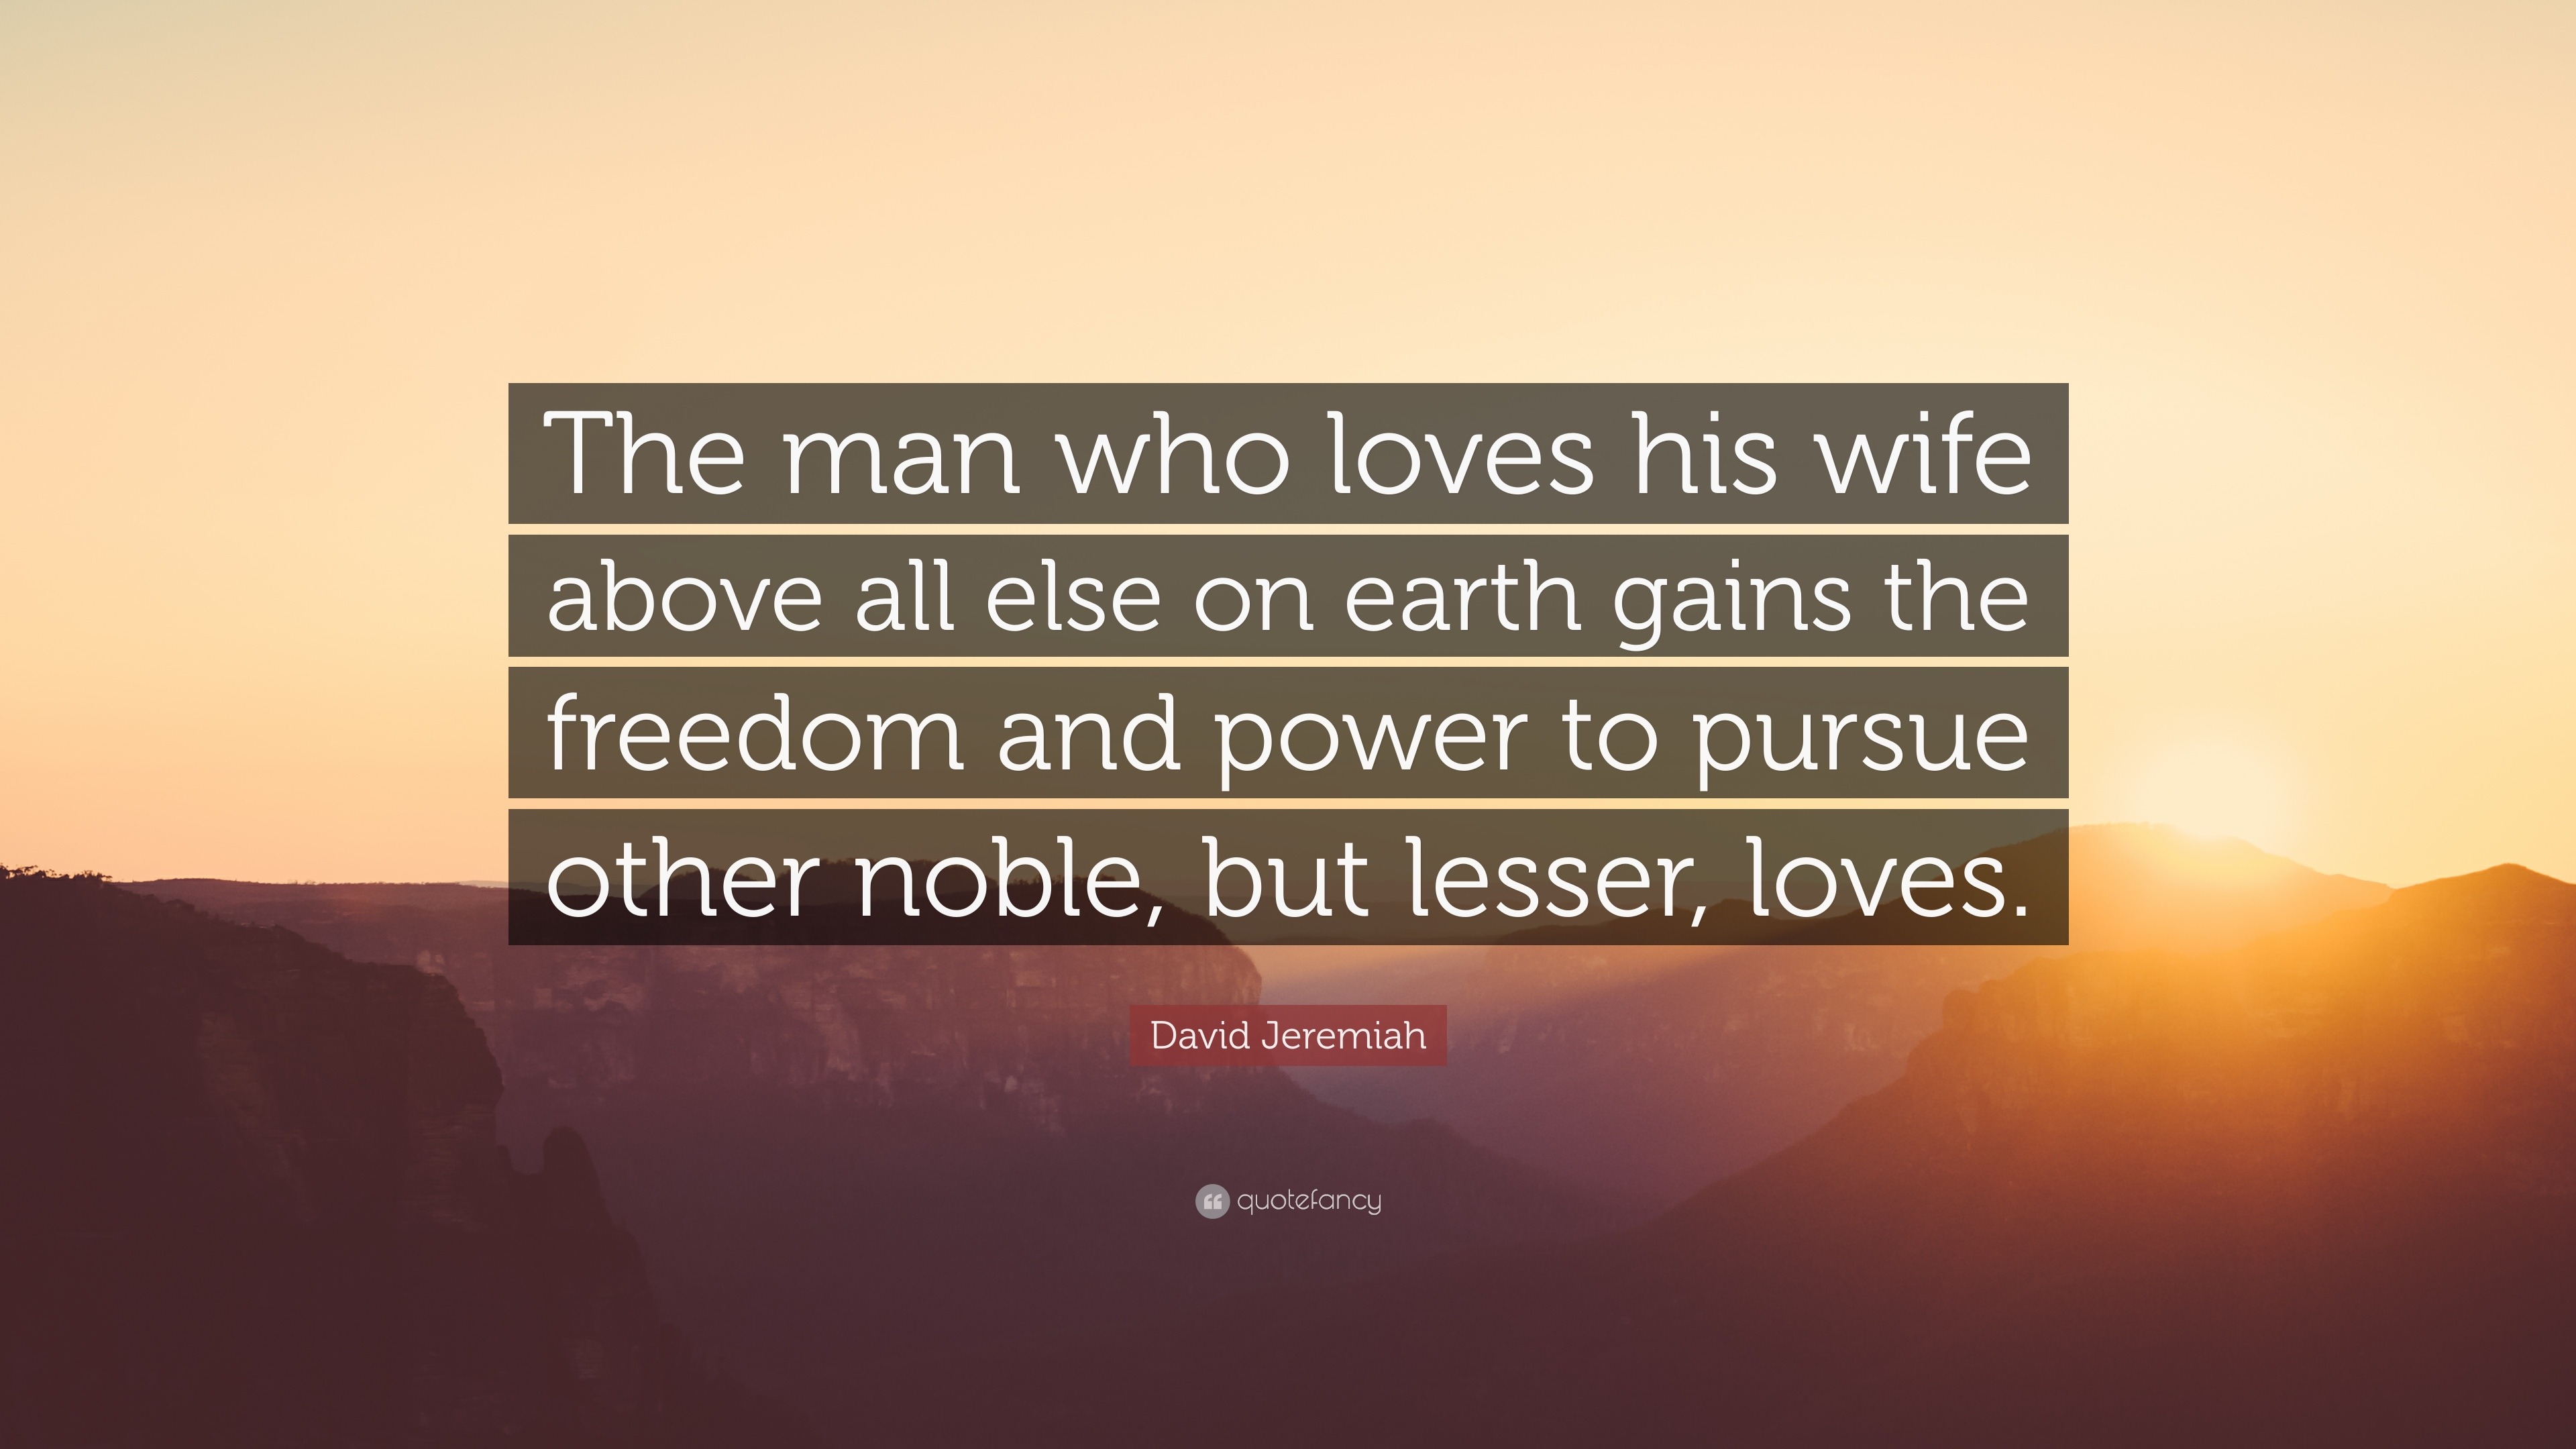 David Jeremiah Quote “The man who loves his wife above all else on earth